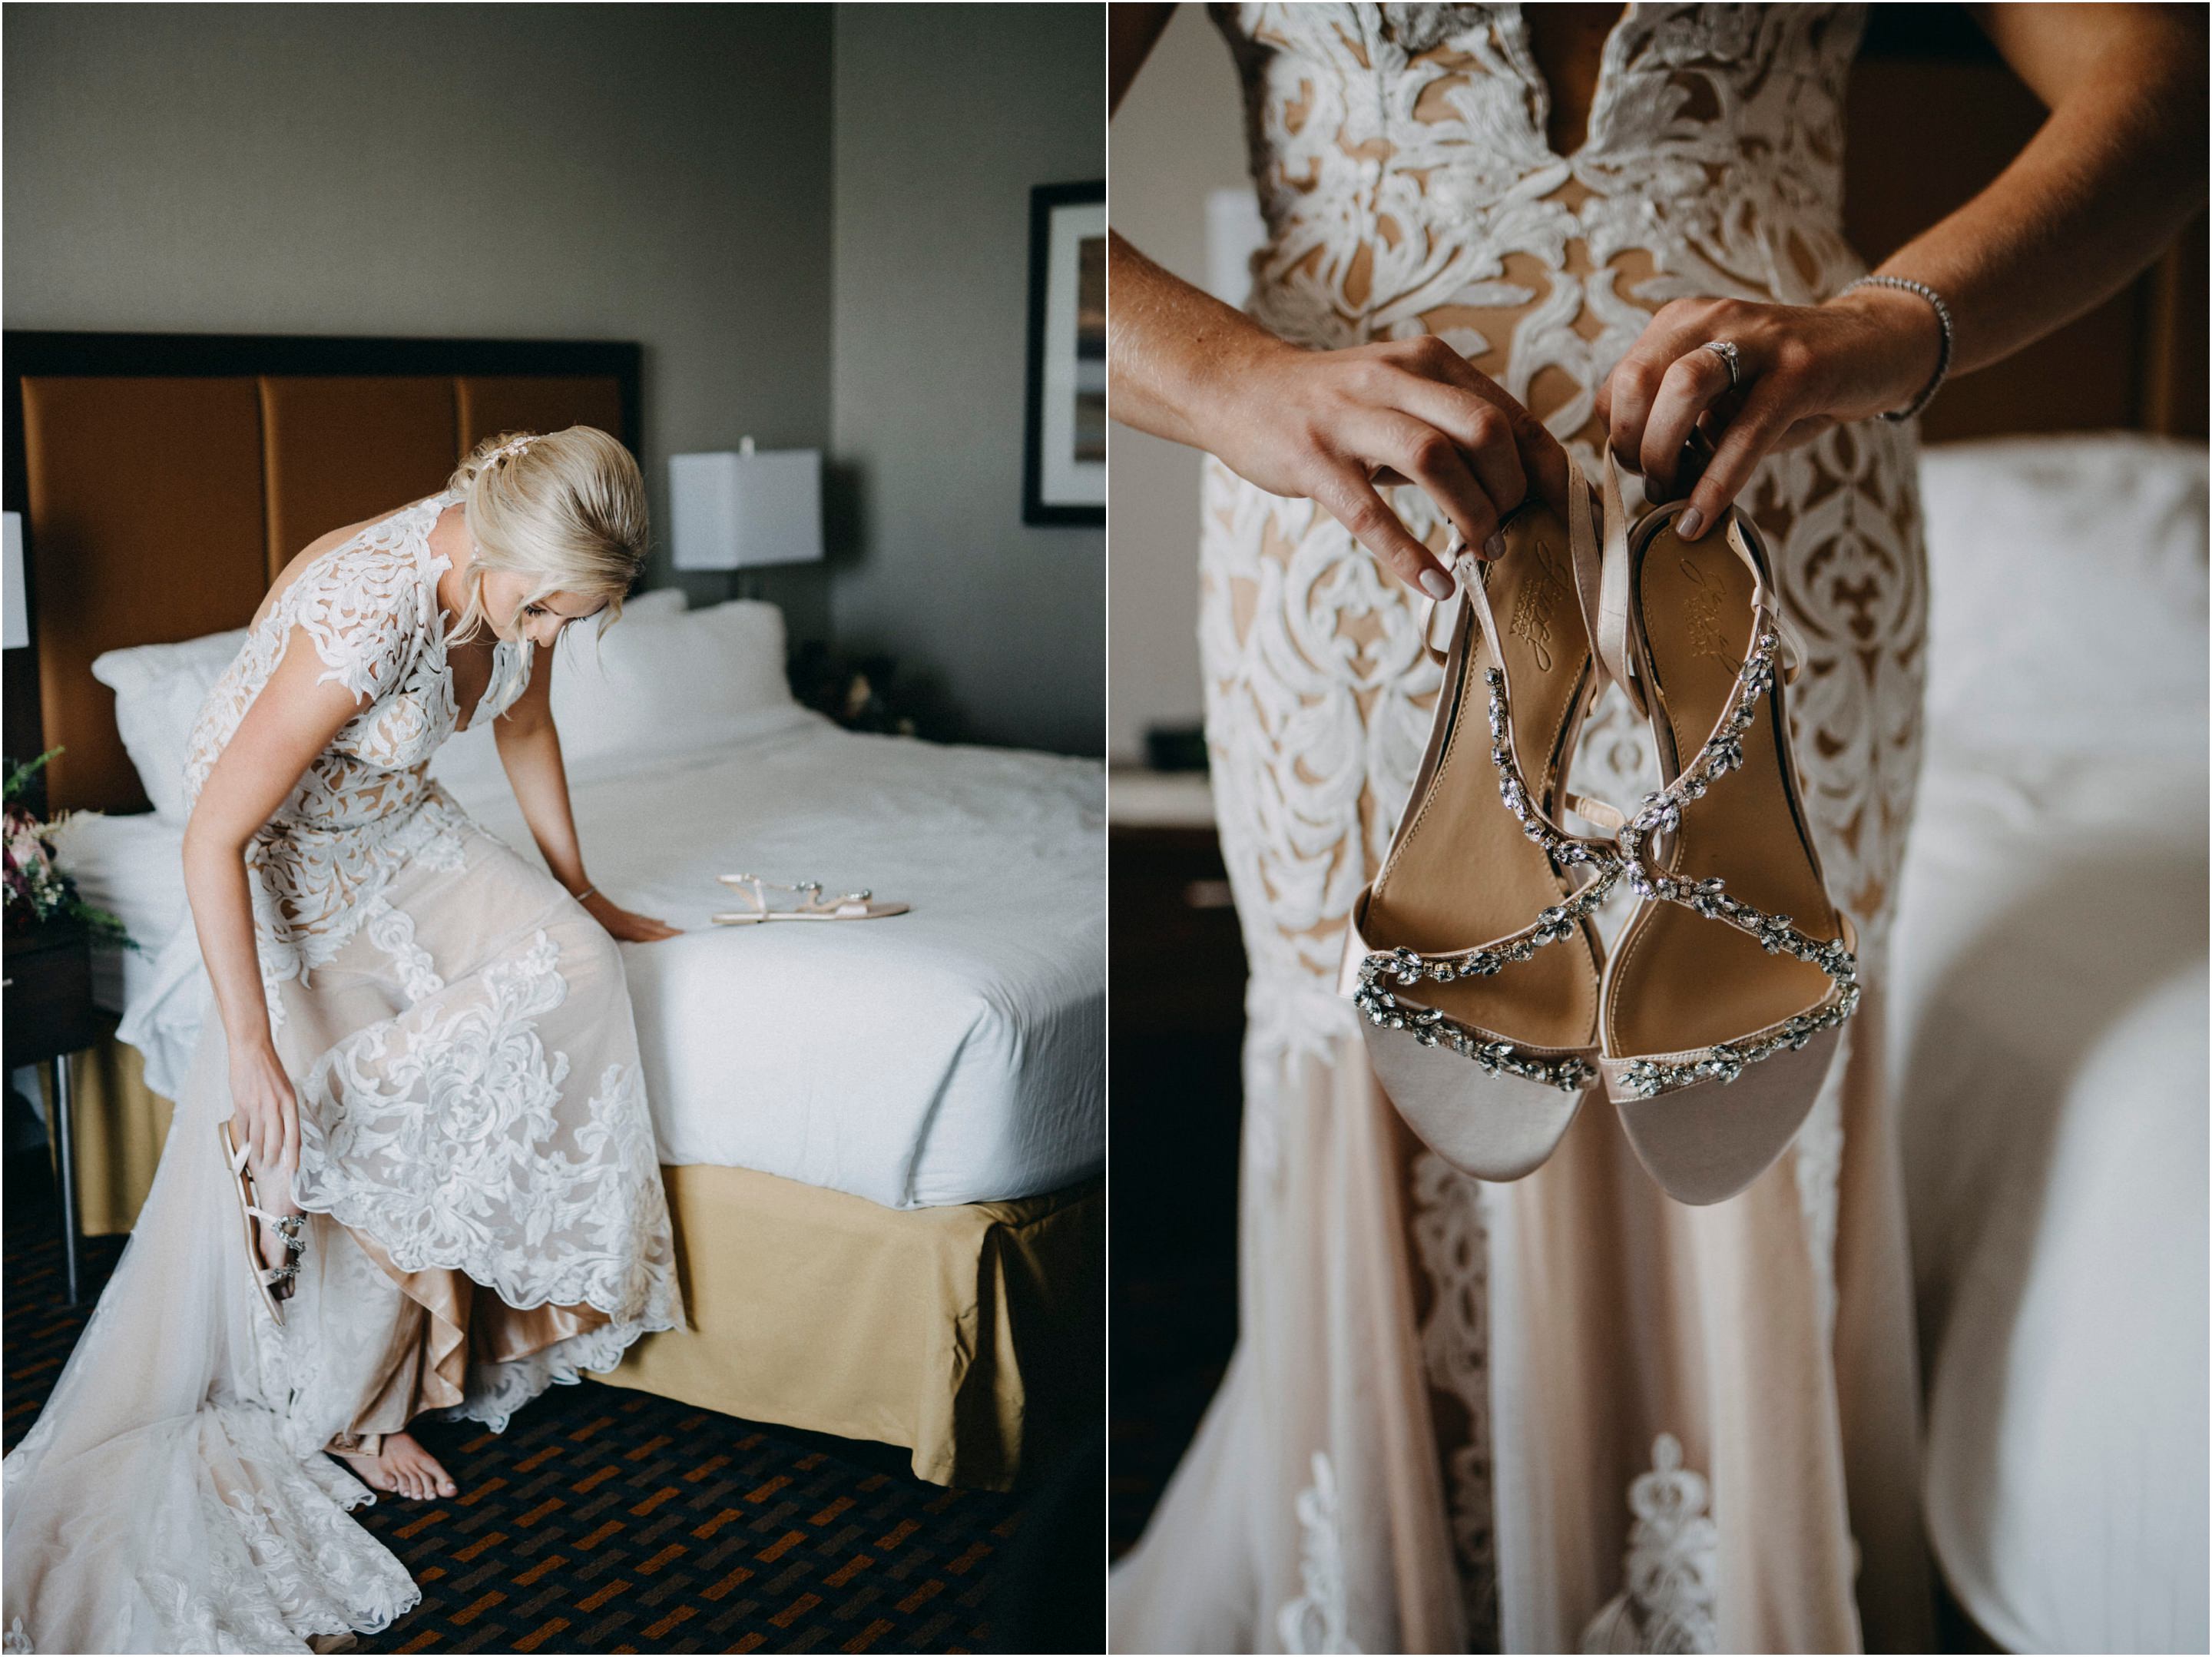 Auberge North Fork Wedding by Cindy Lottes Photography